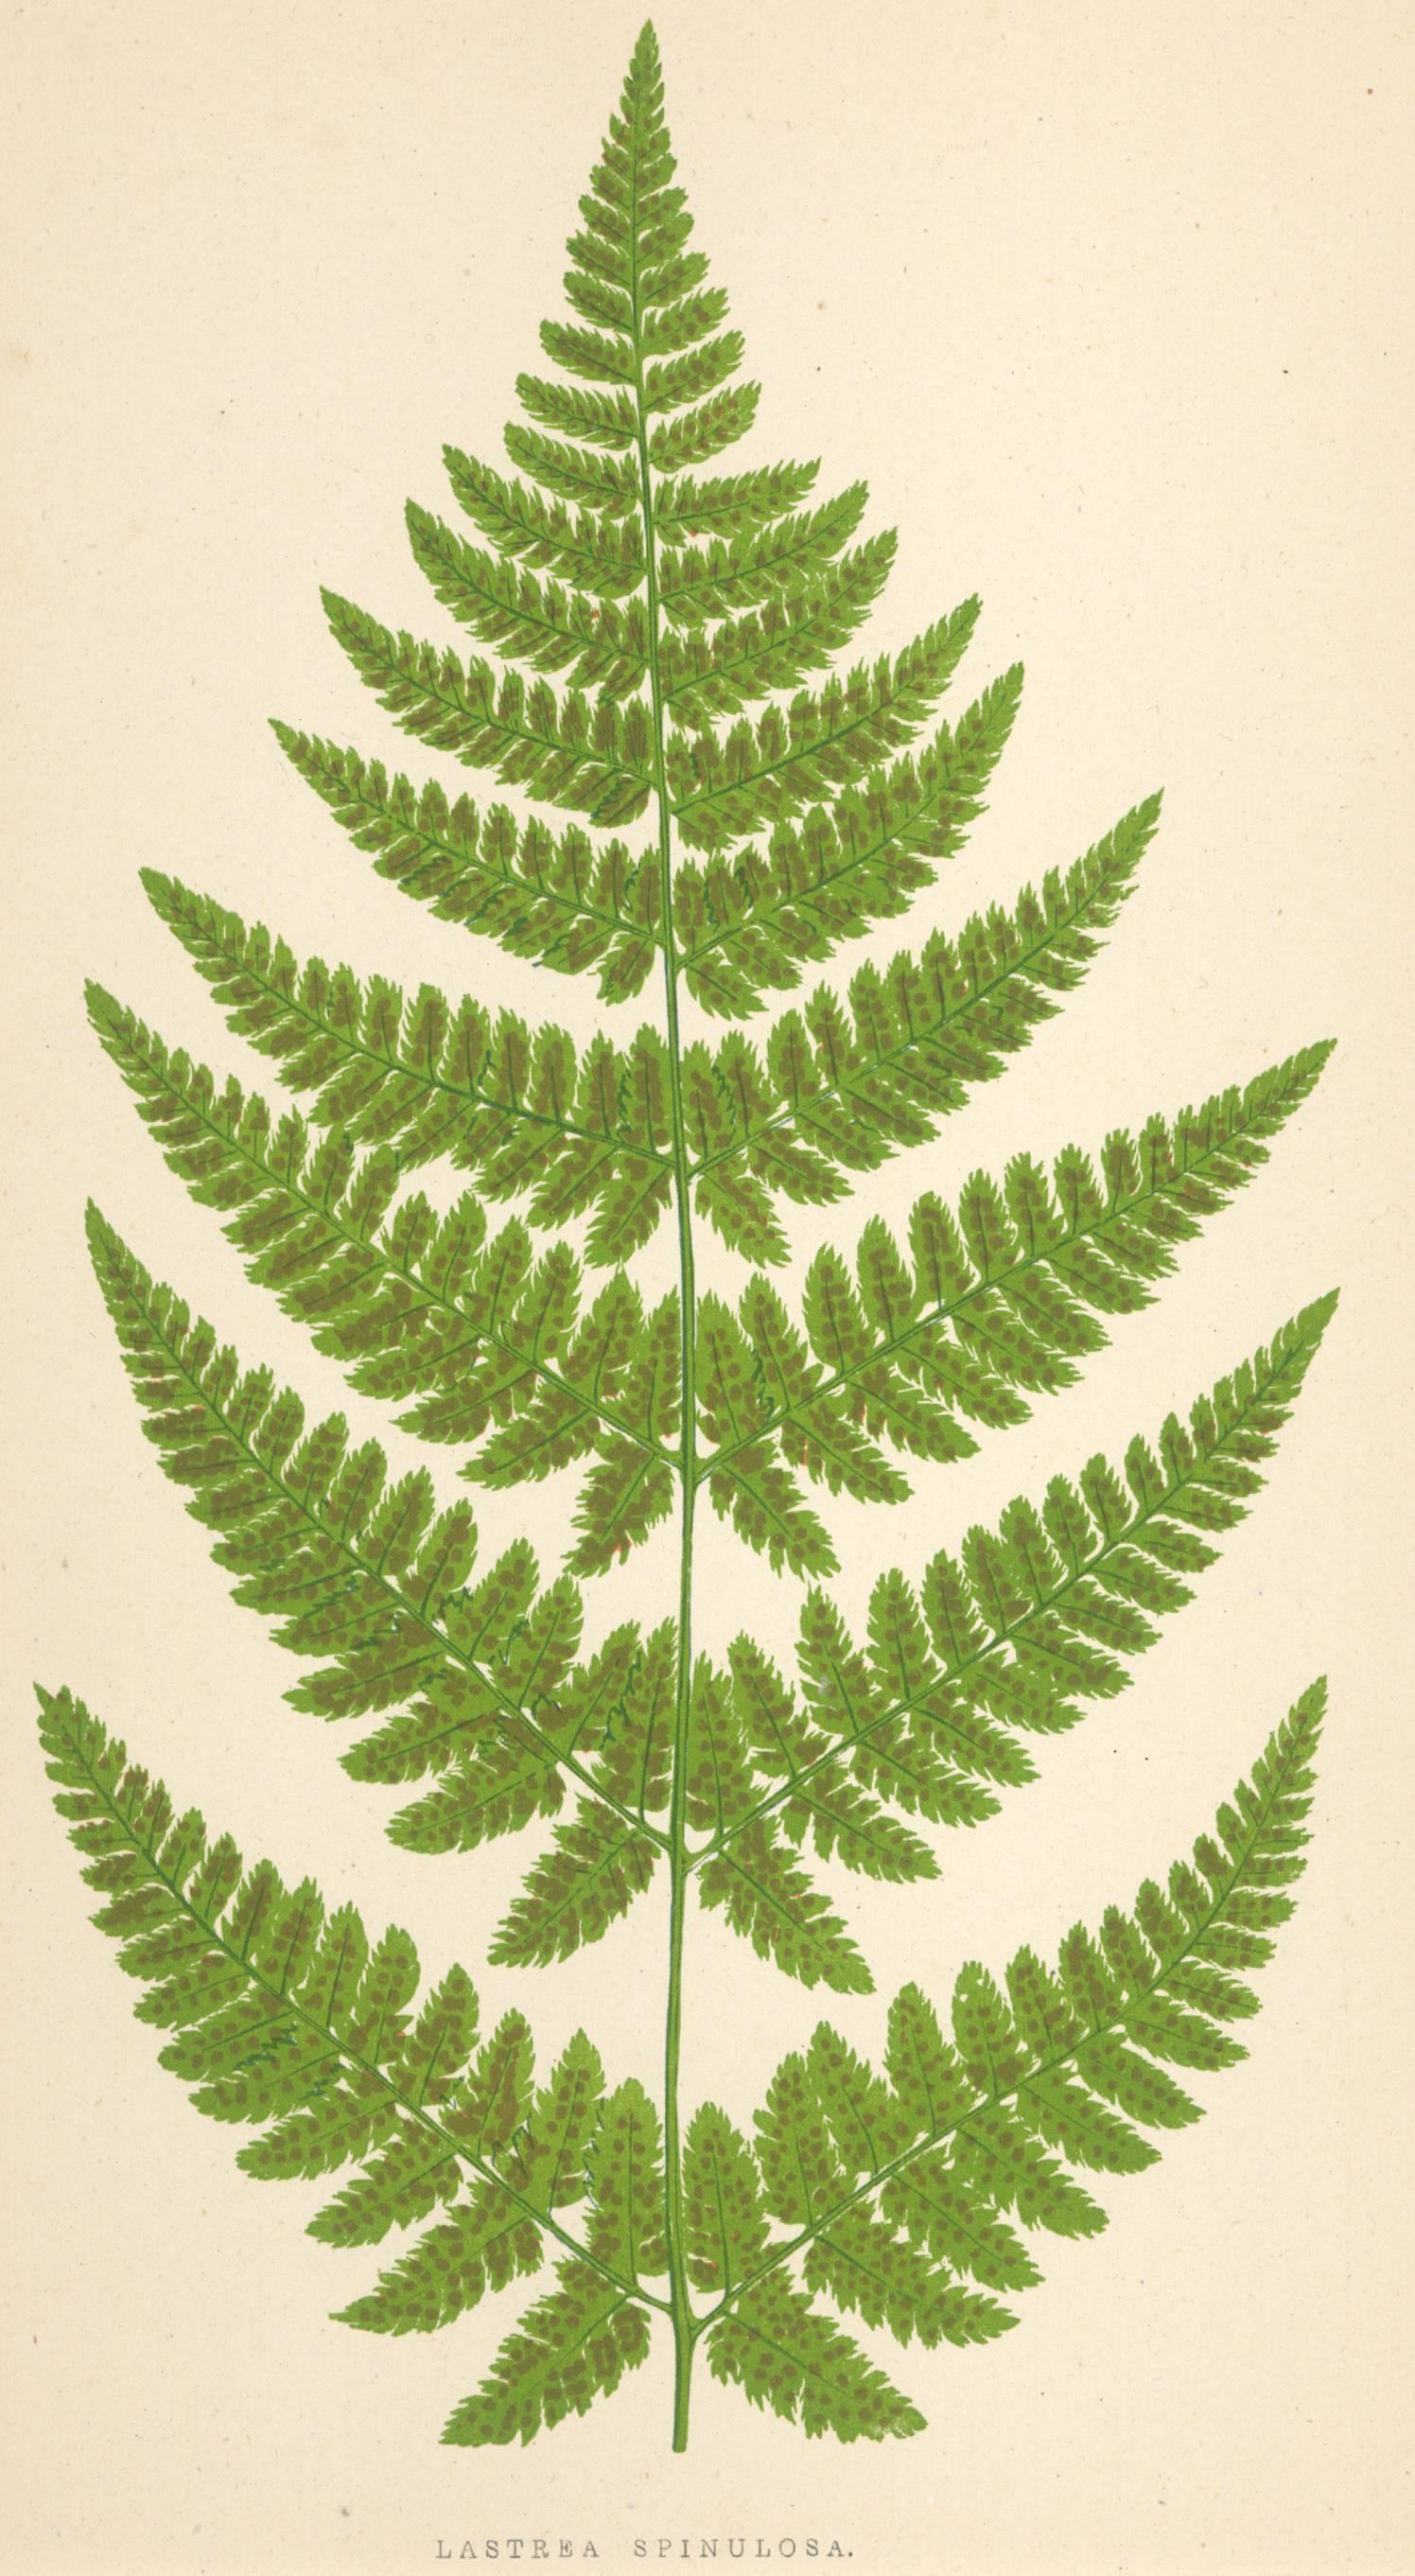 Polystichum Angulare (Var. Acuto-gracile and Alatum) and Lastrea Spinulosa chromolithographs of from the classic botanical text "Our Native Ferns, or History of the British Species and Varieties" by E.J. Lowe, 1867. Framed with an